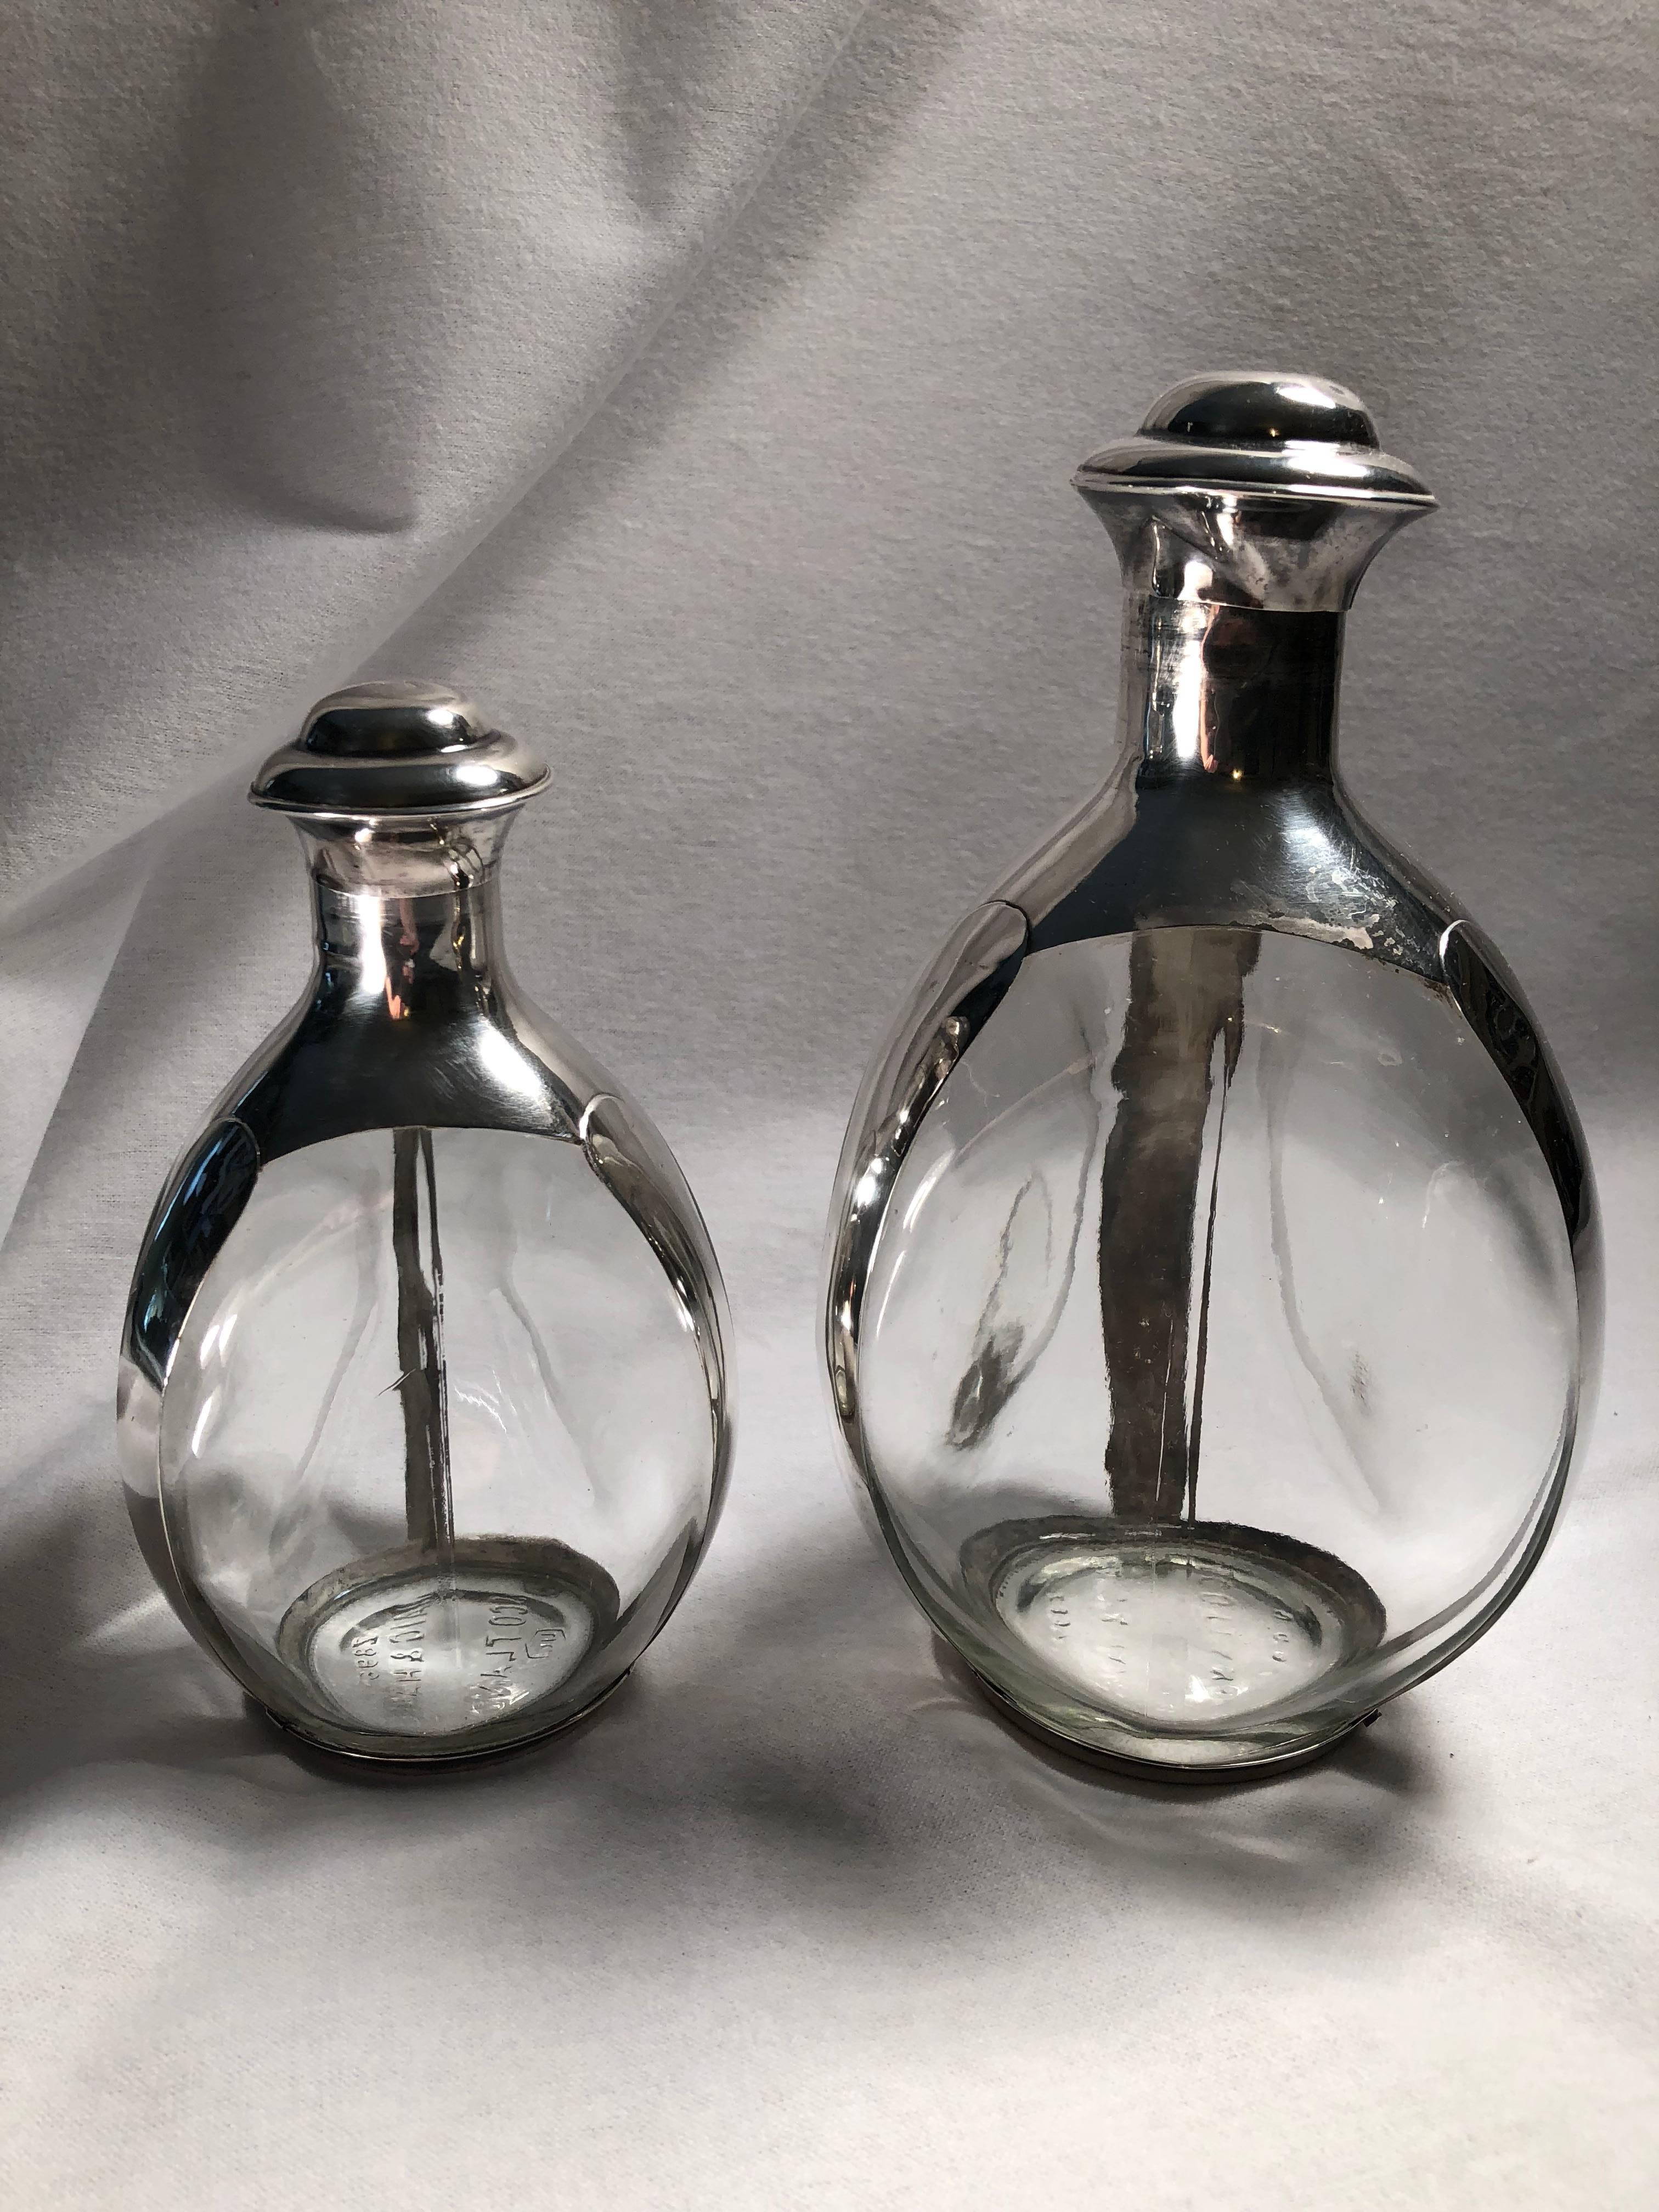 Elegant but simple in design these beautiful scotch whisky decanters are somewhat rare in that they are a set of two. The bottles are clear with no water marks or staining. The sterling bonding is in great condition. The large stopper has four small